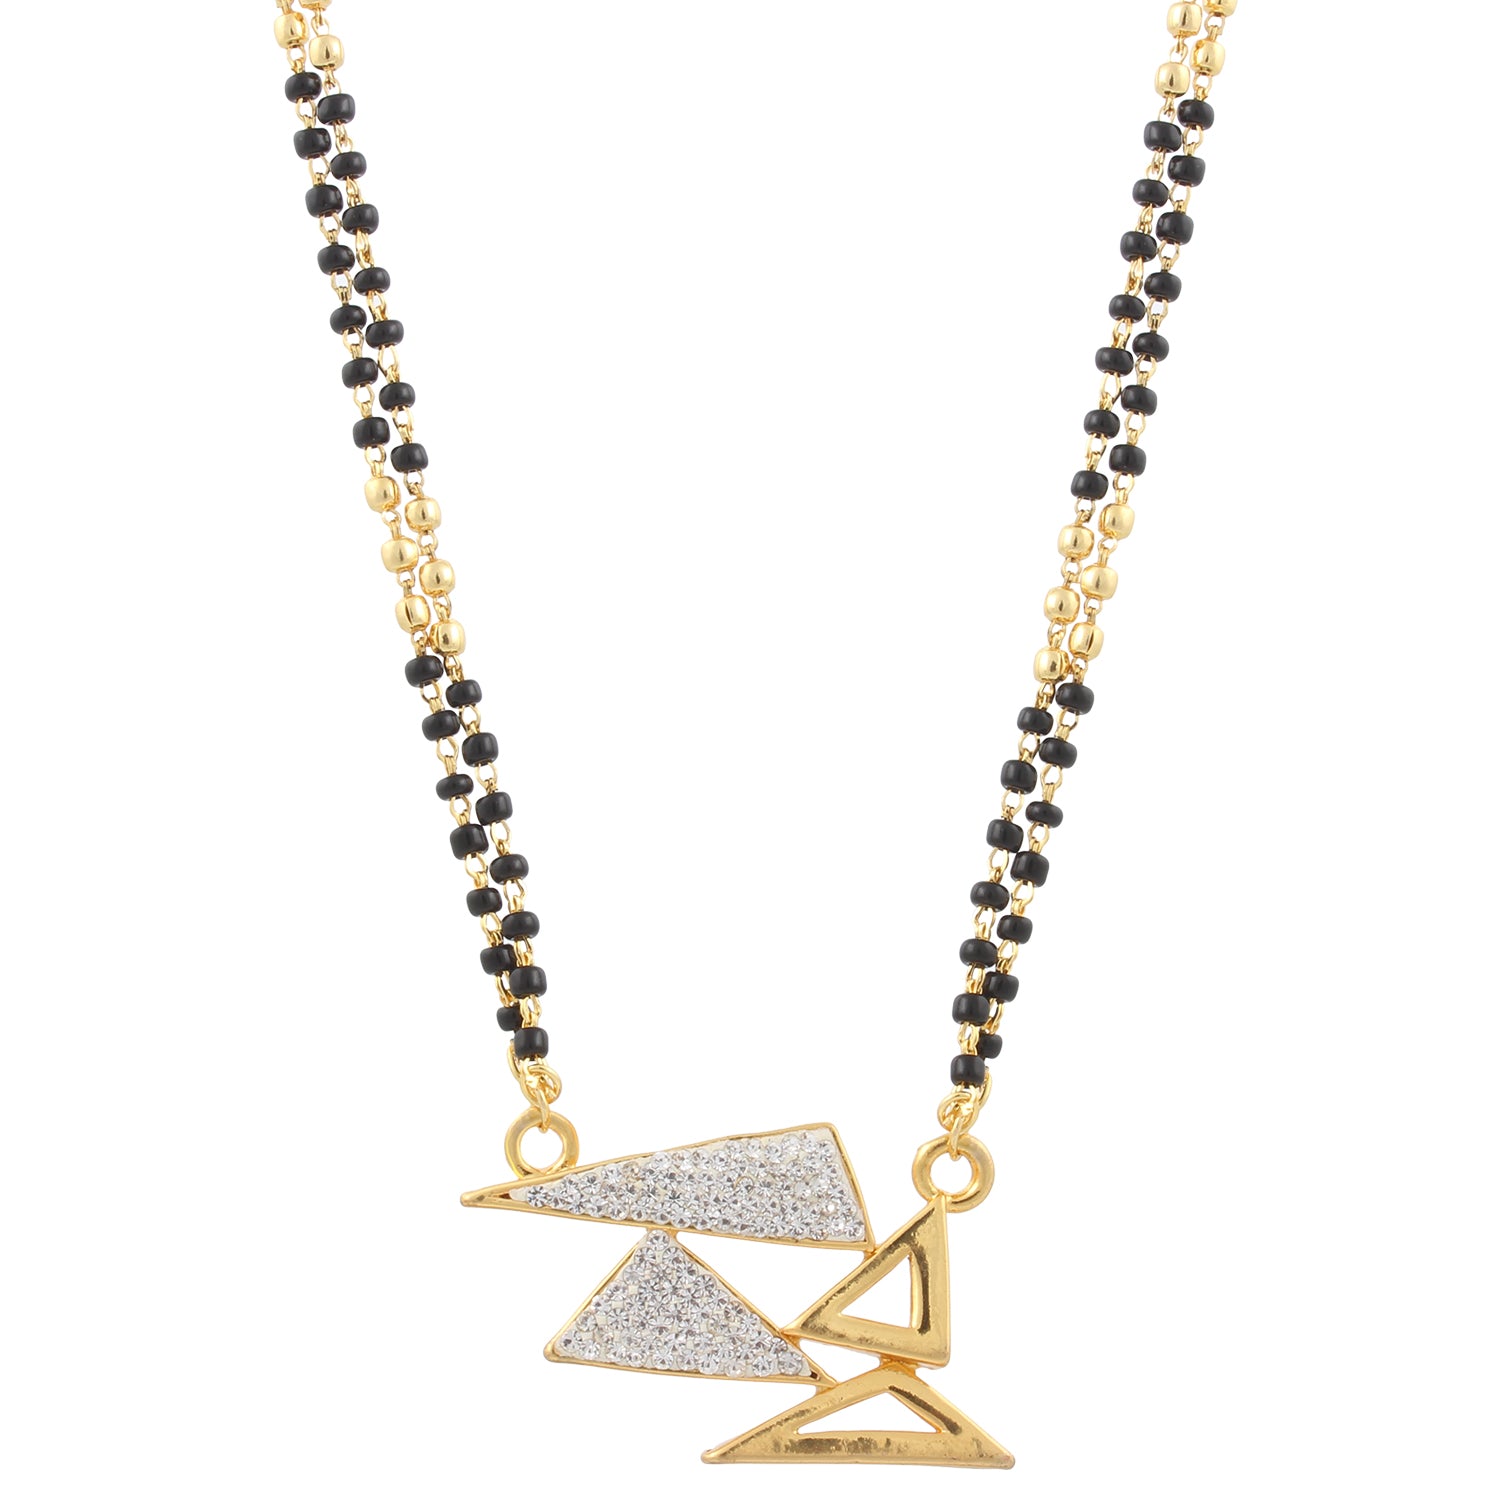 Gold Plated, Diamond Shaped, White Stoned Mangalsutra with Gold and Black beads